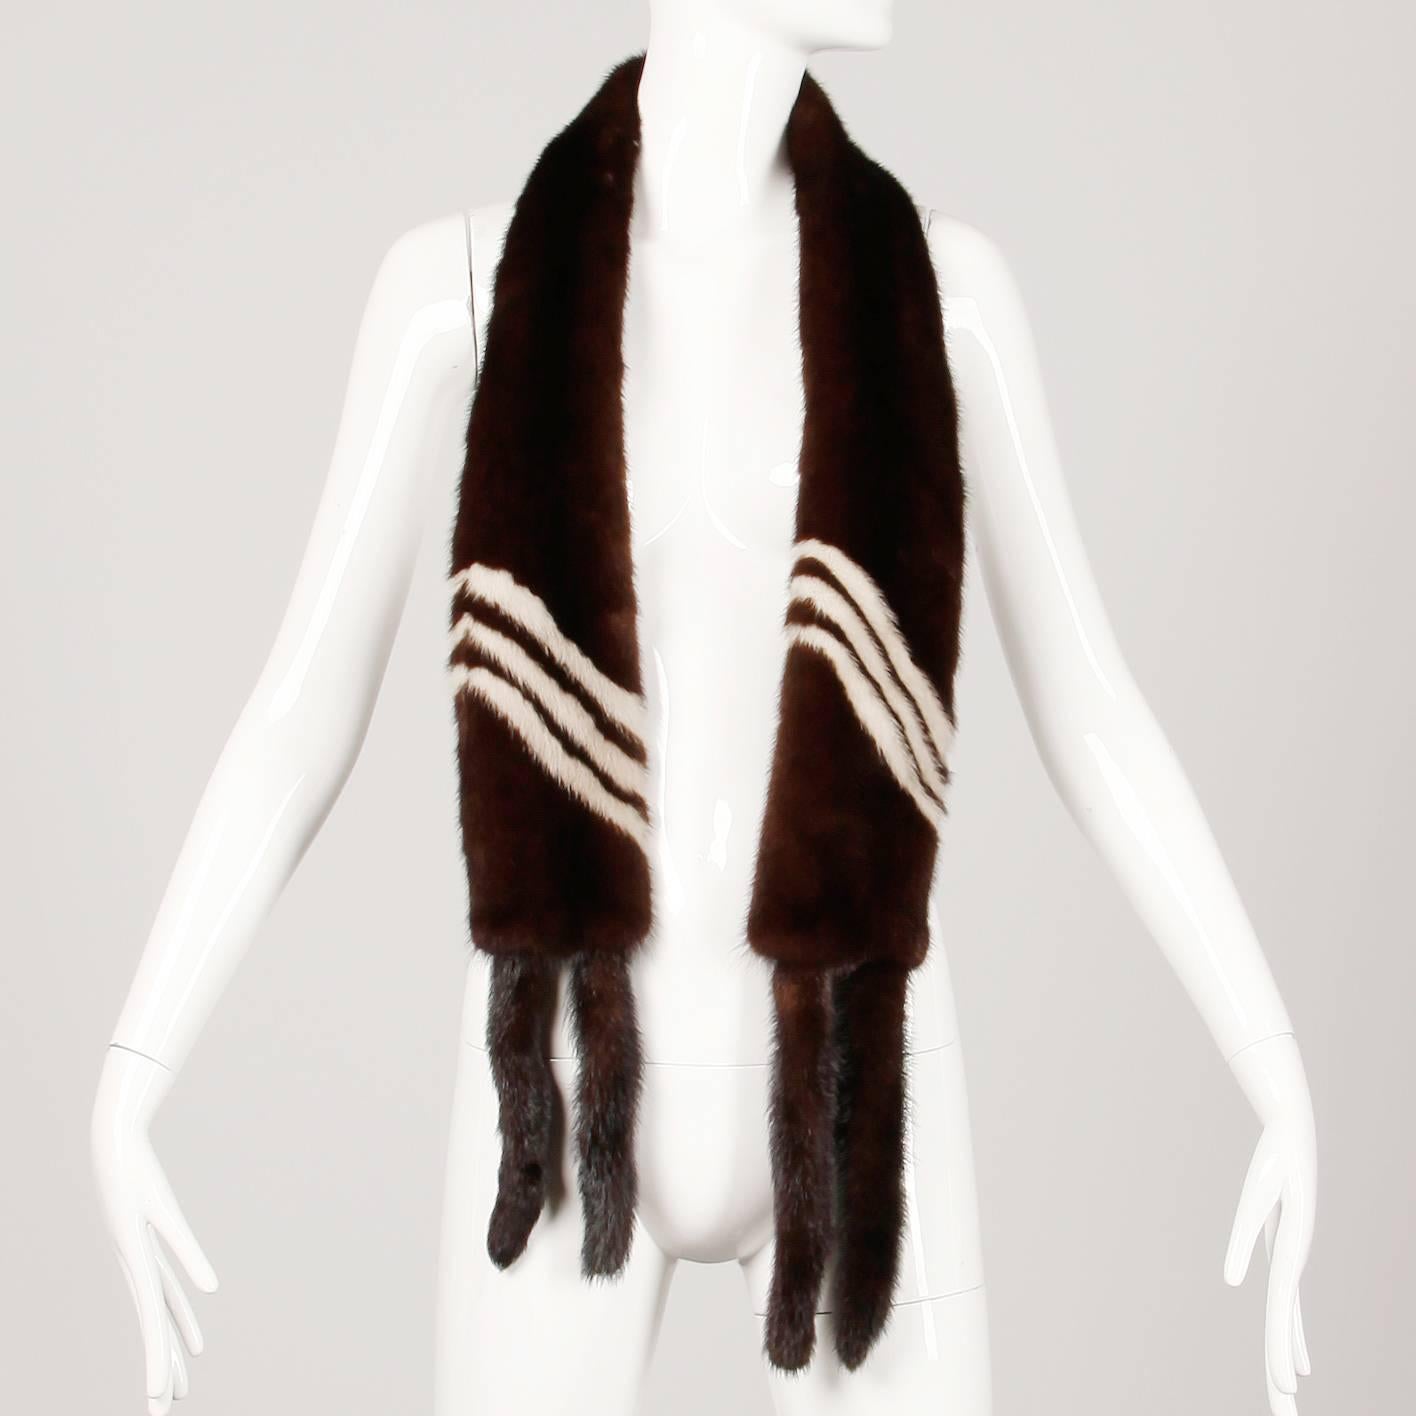 Gorgeous vintage mink fur wrap in brown and blonde stripes with mink tail trim. Genuine mink fur is glossy, silky and soft and in excellent condition (stored properly). Measures 66" total length, 3" wide in the middle, 4.5" wide at